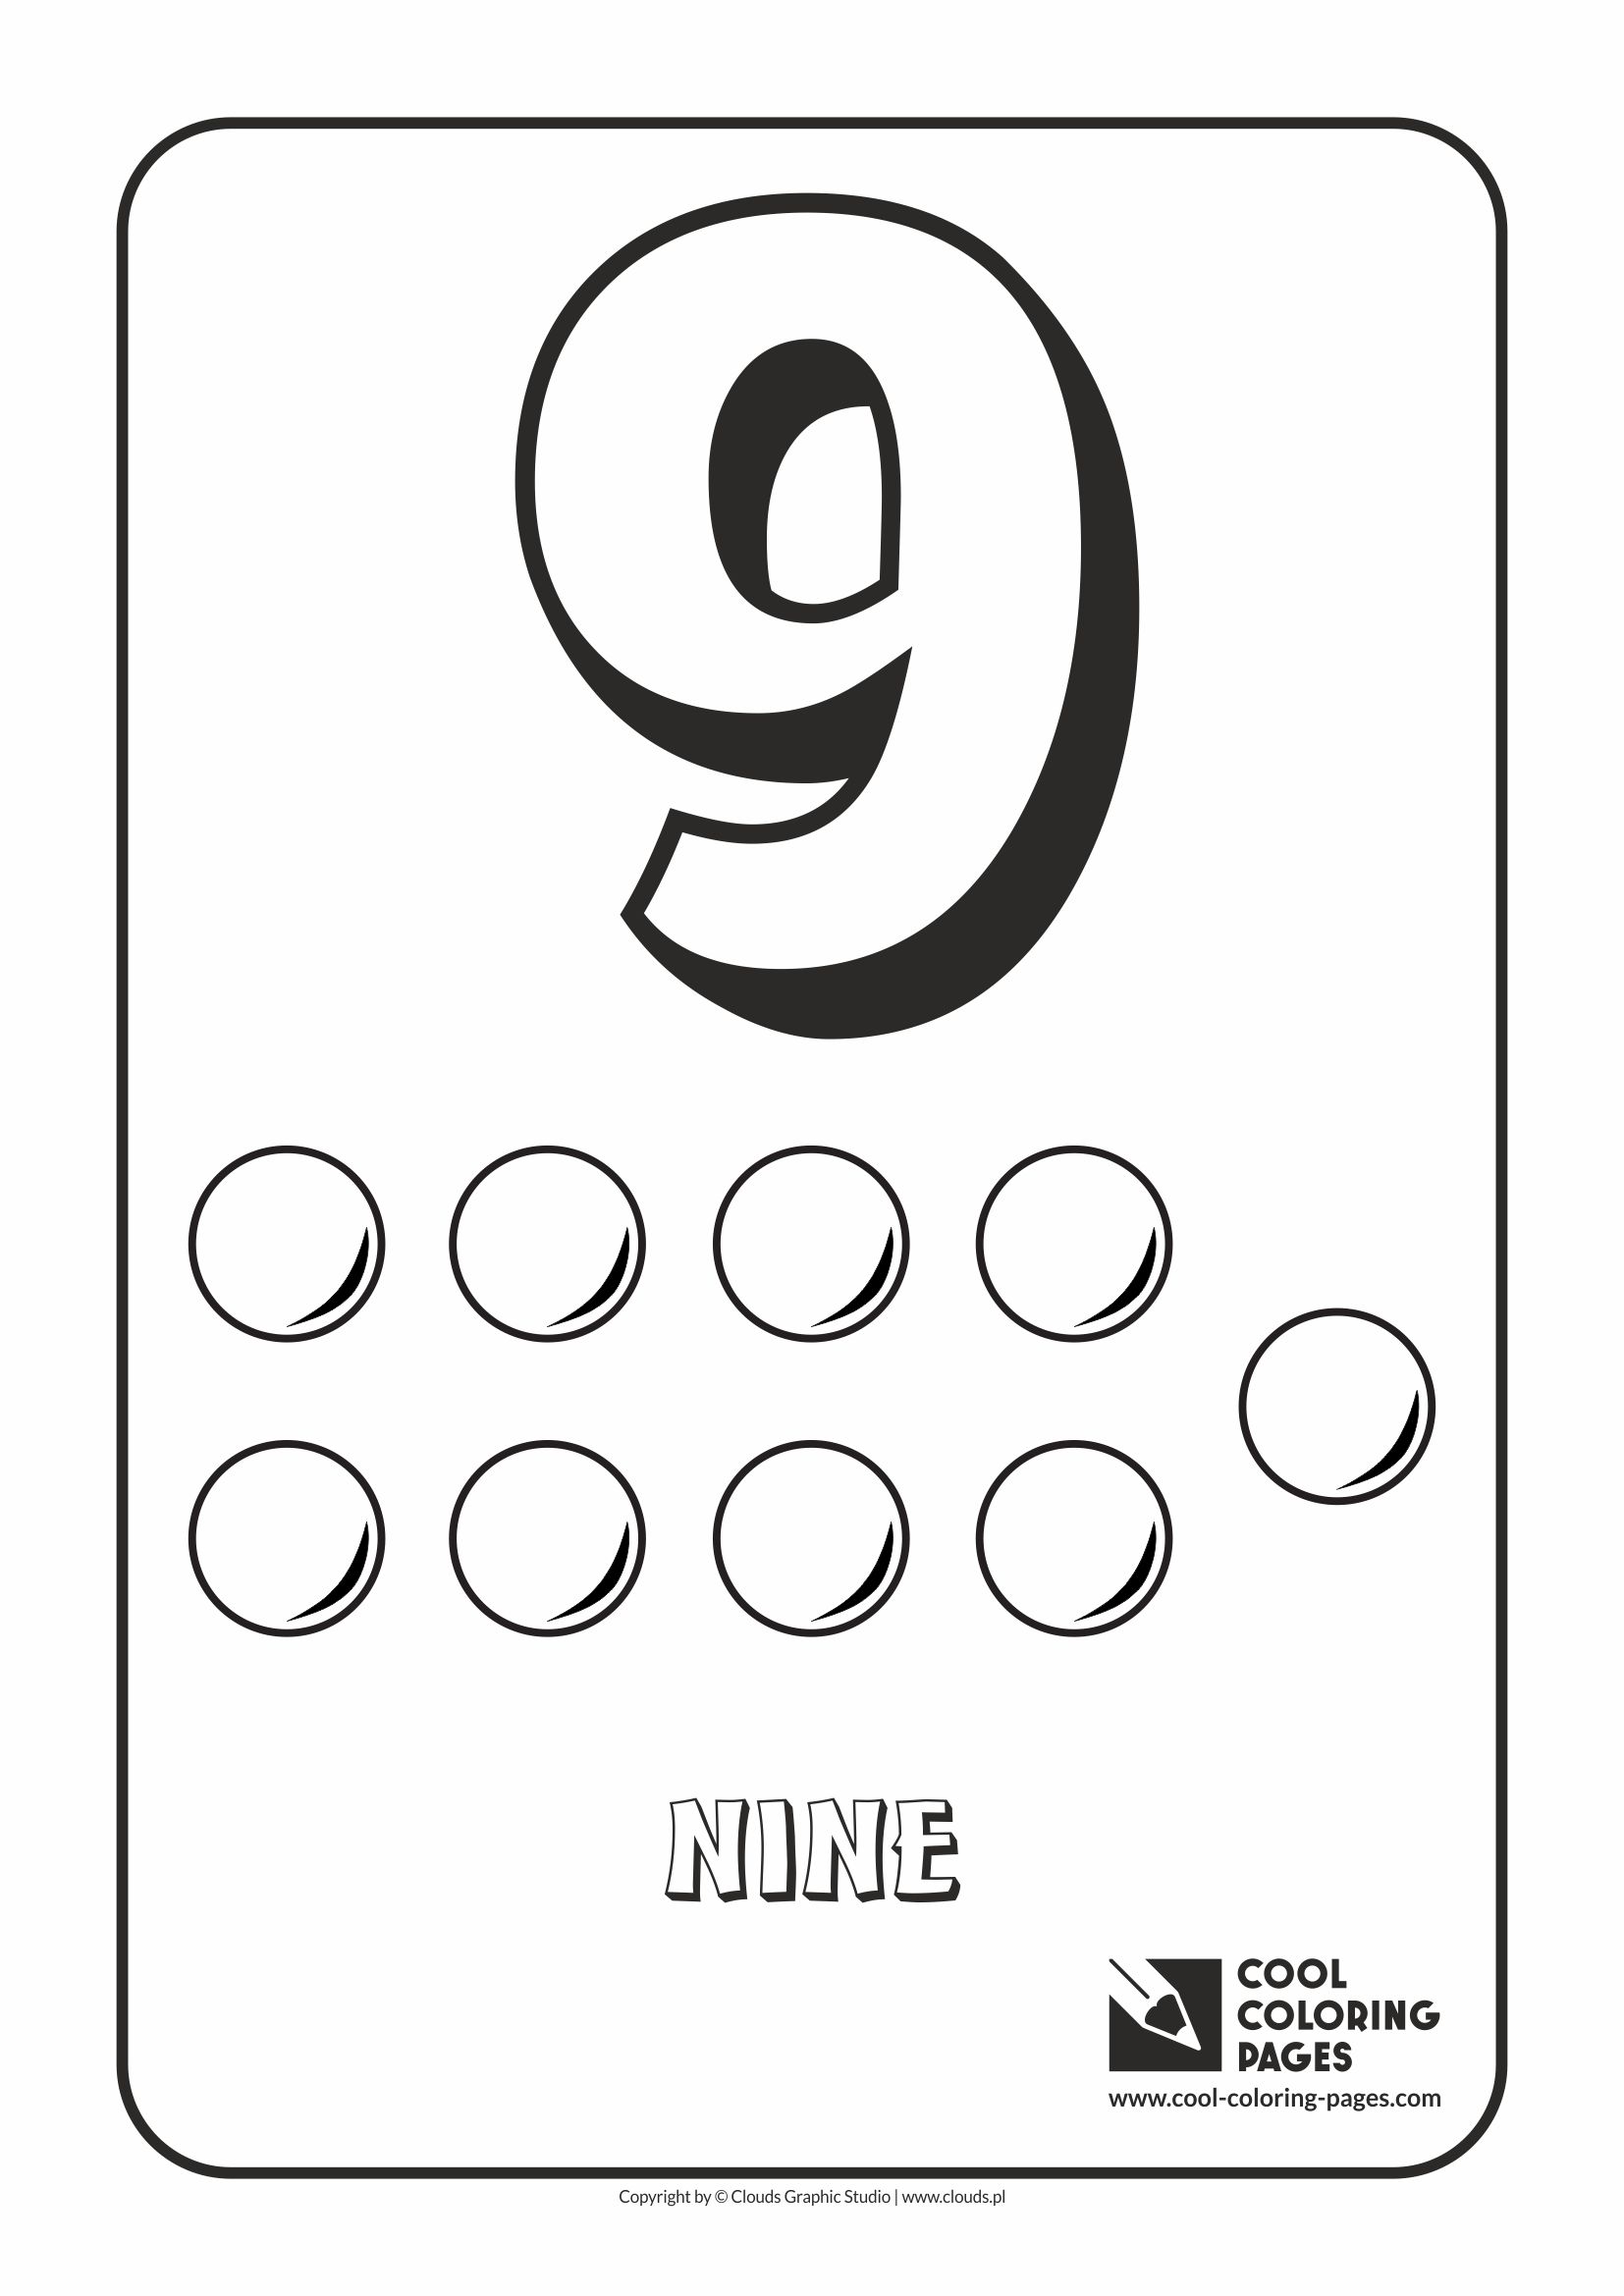 Cool Coloring Pages - Digits / Digit 9 / Coloring page with digit 9